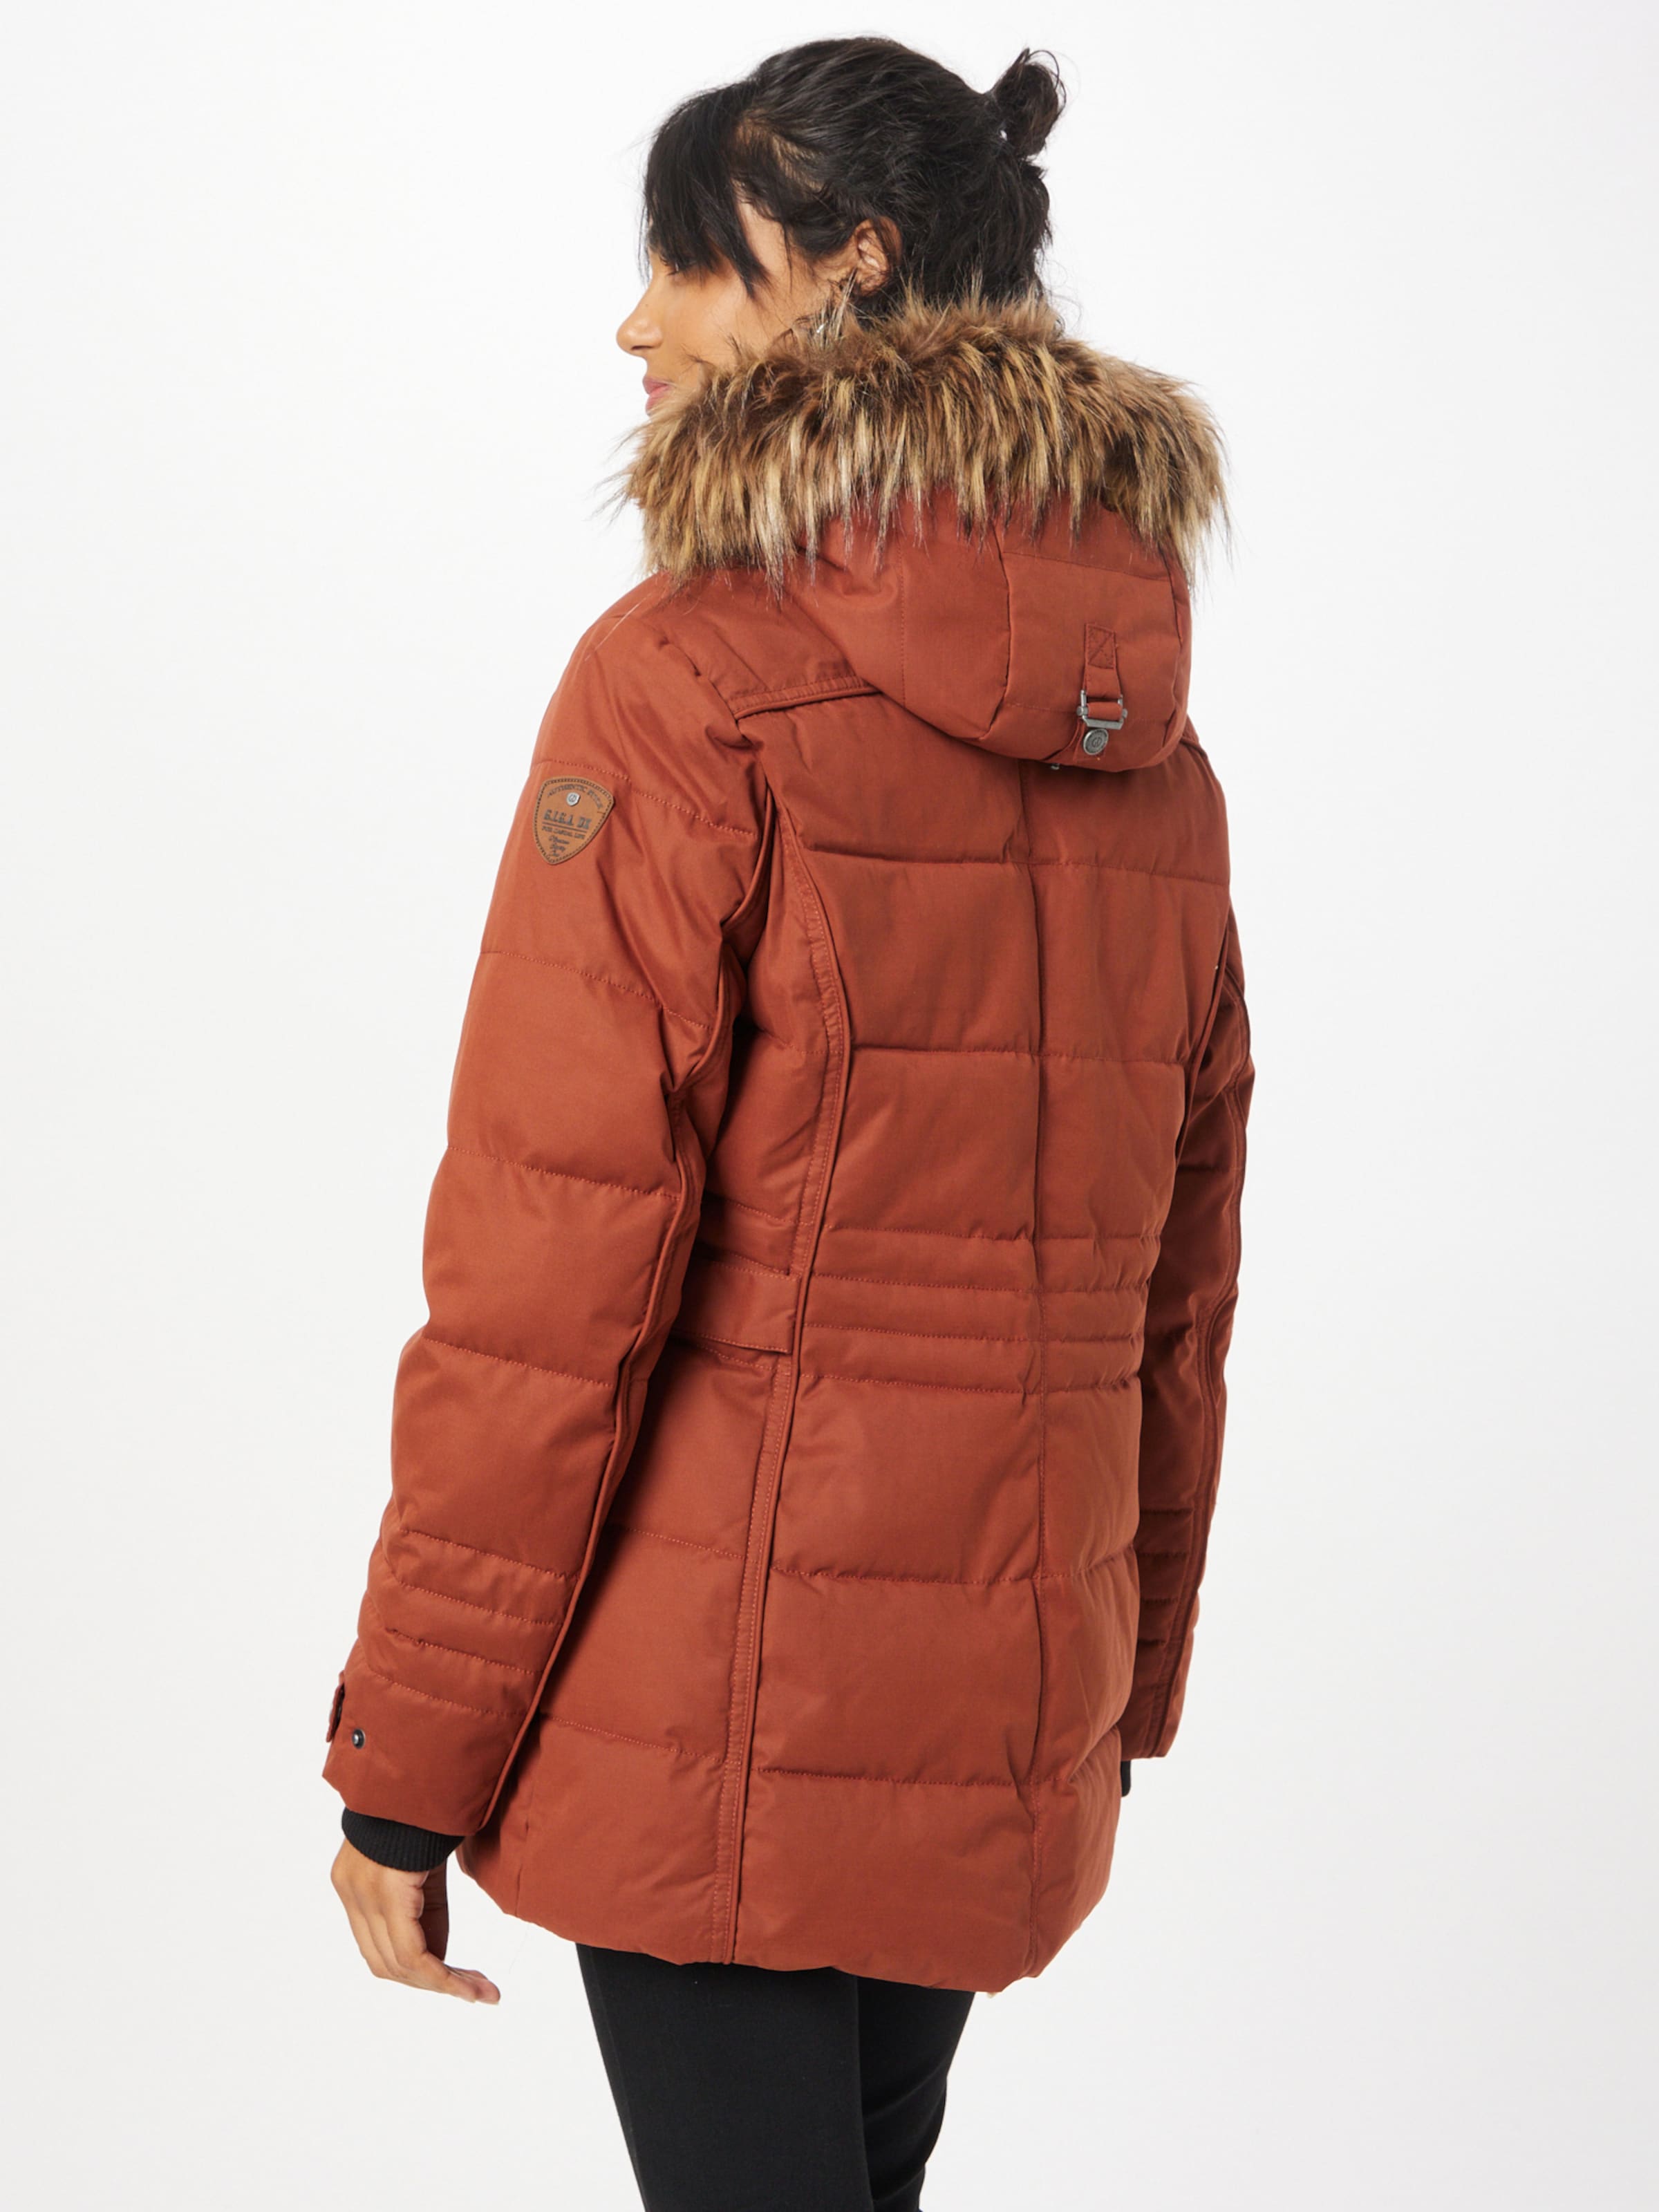 G.I.G.A. DX by killtec Outdoor Jacket 'Oiva' in Caramel | ABOUT YOU